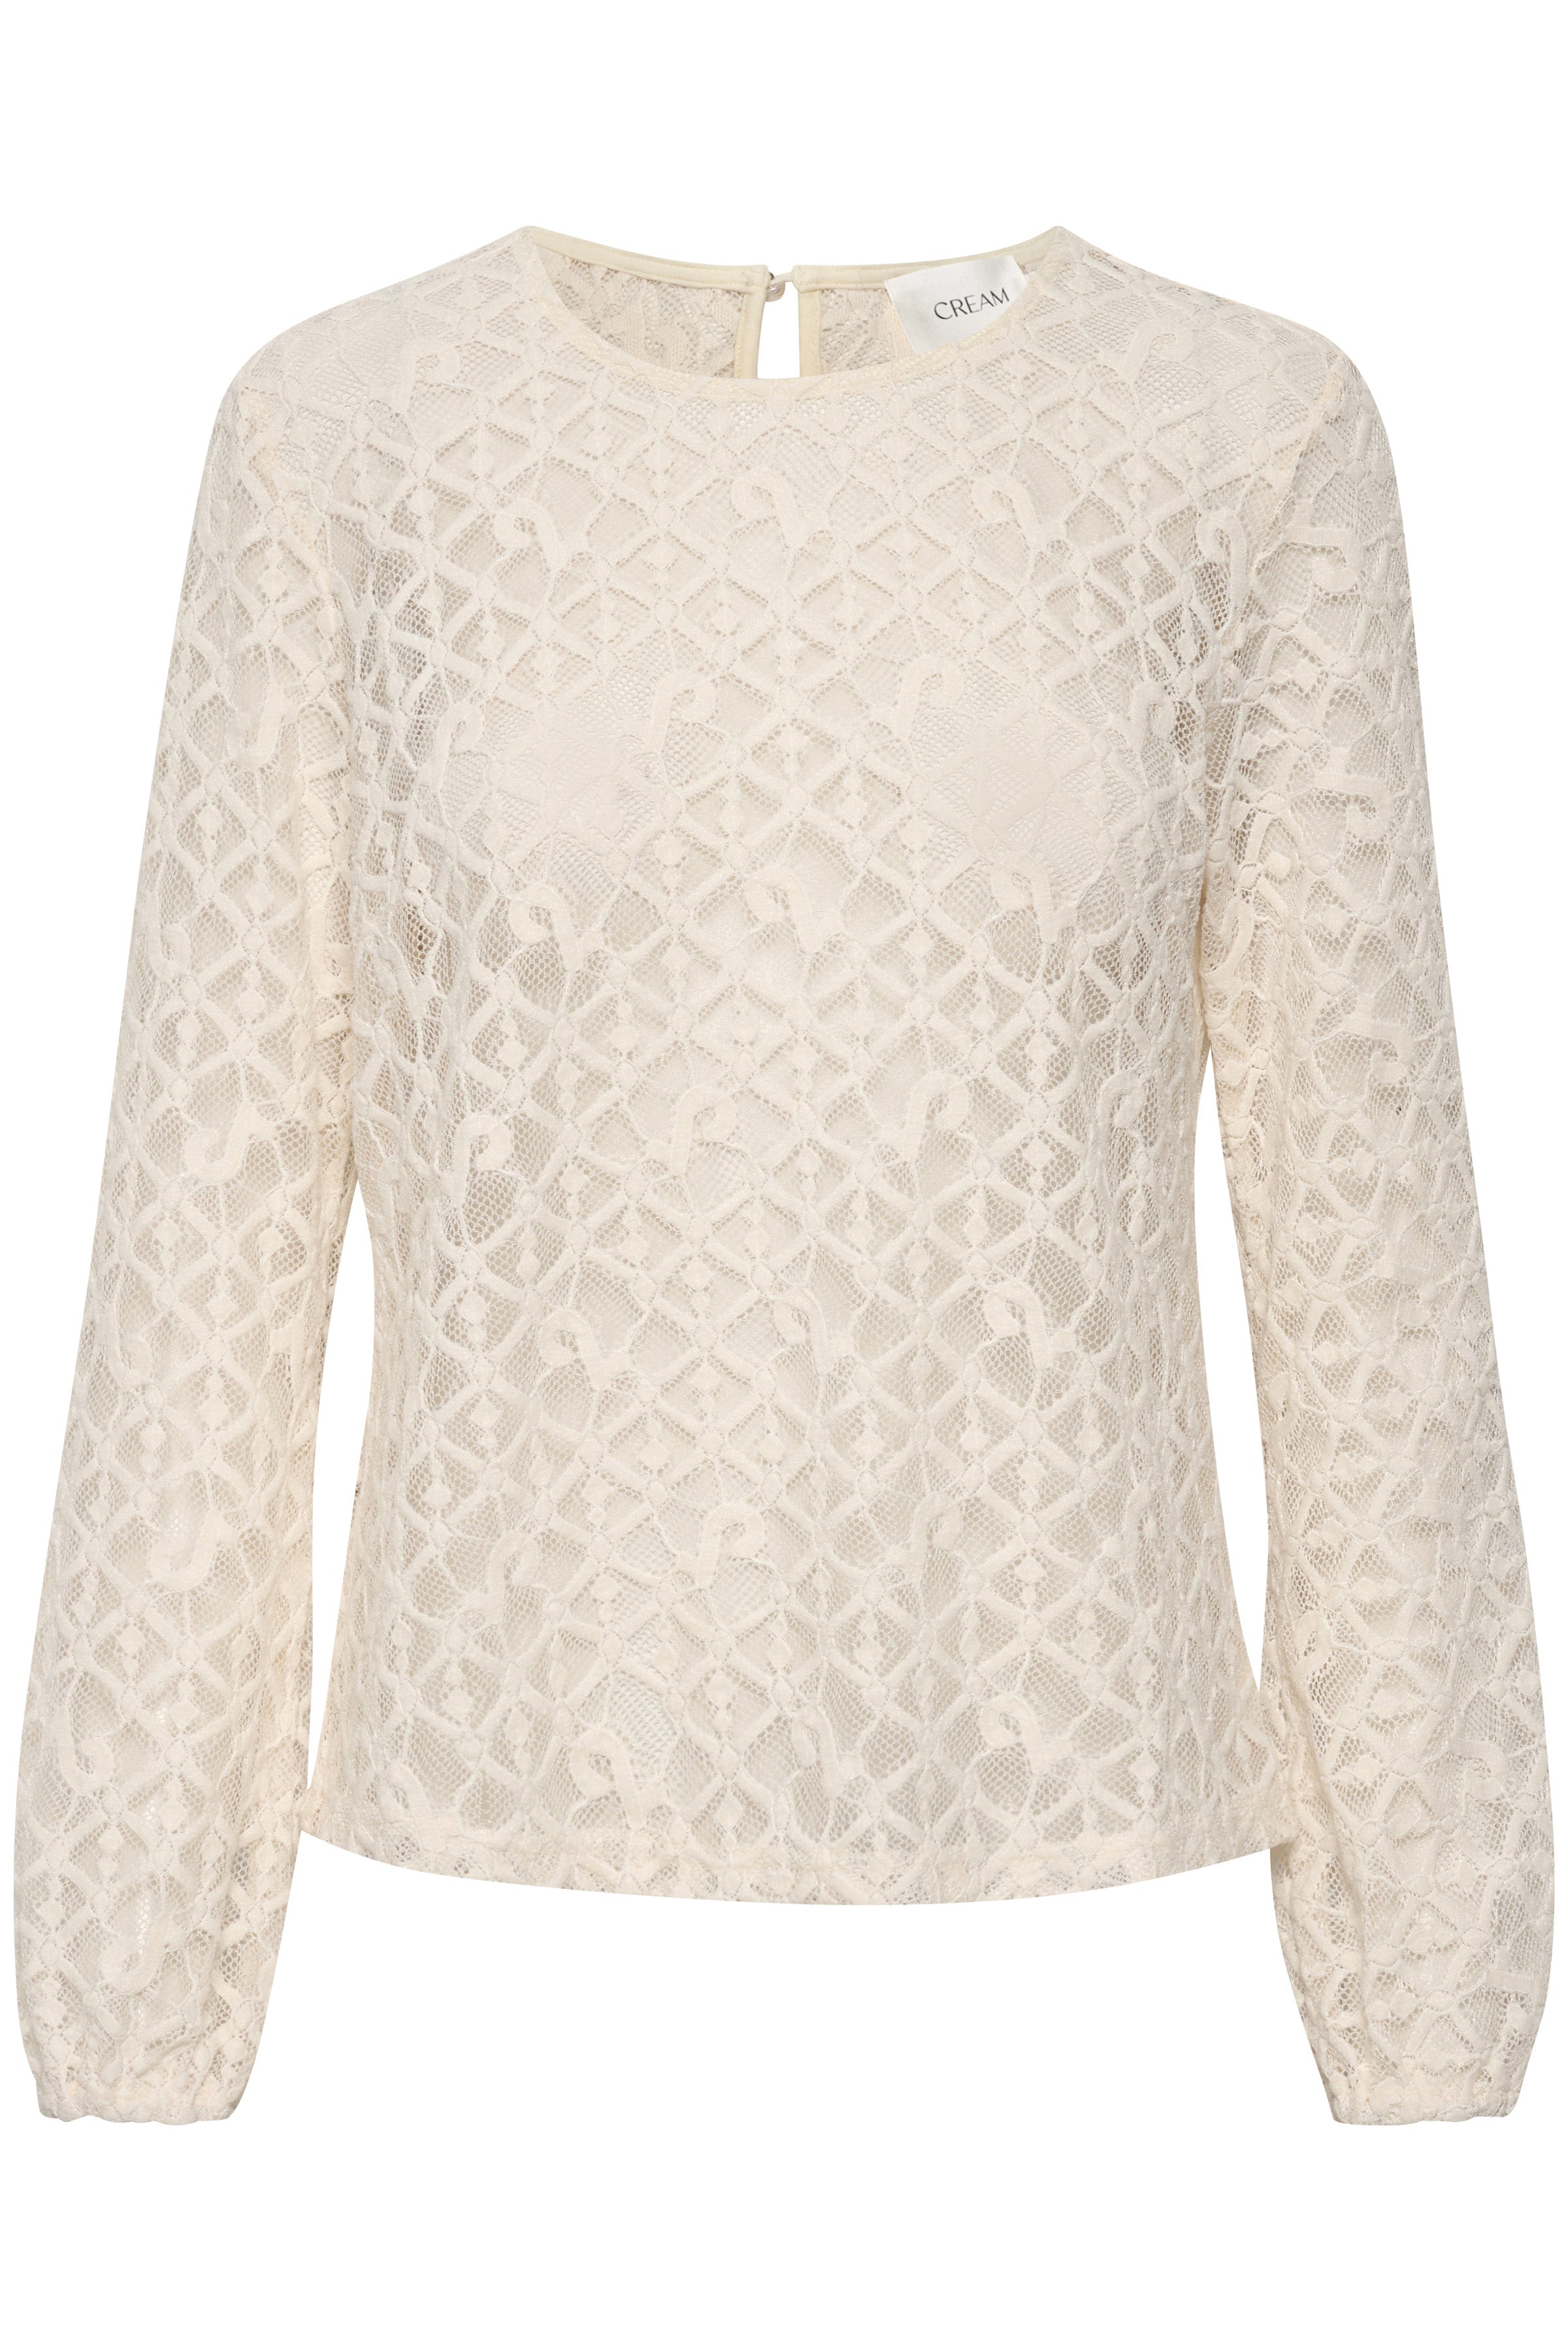 Feel beautiful and timeless in our Cream Gila Lace Blouse. The delicate lace adds an elegant touch to any ensemble. 